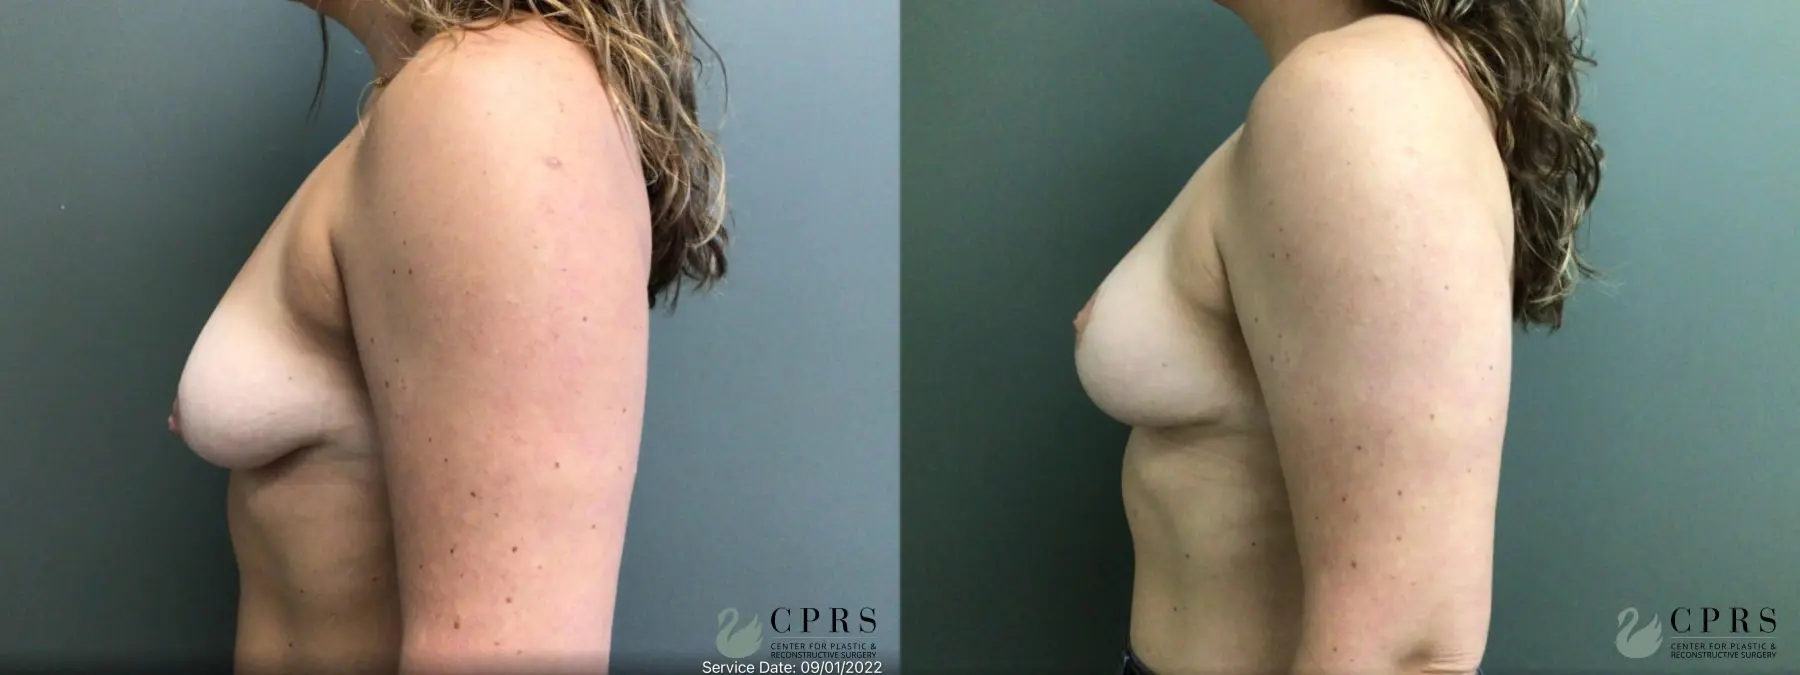 Breast Lift: Patient 8 - Before and After 3